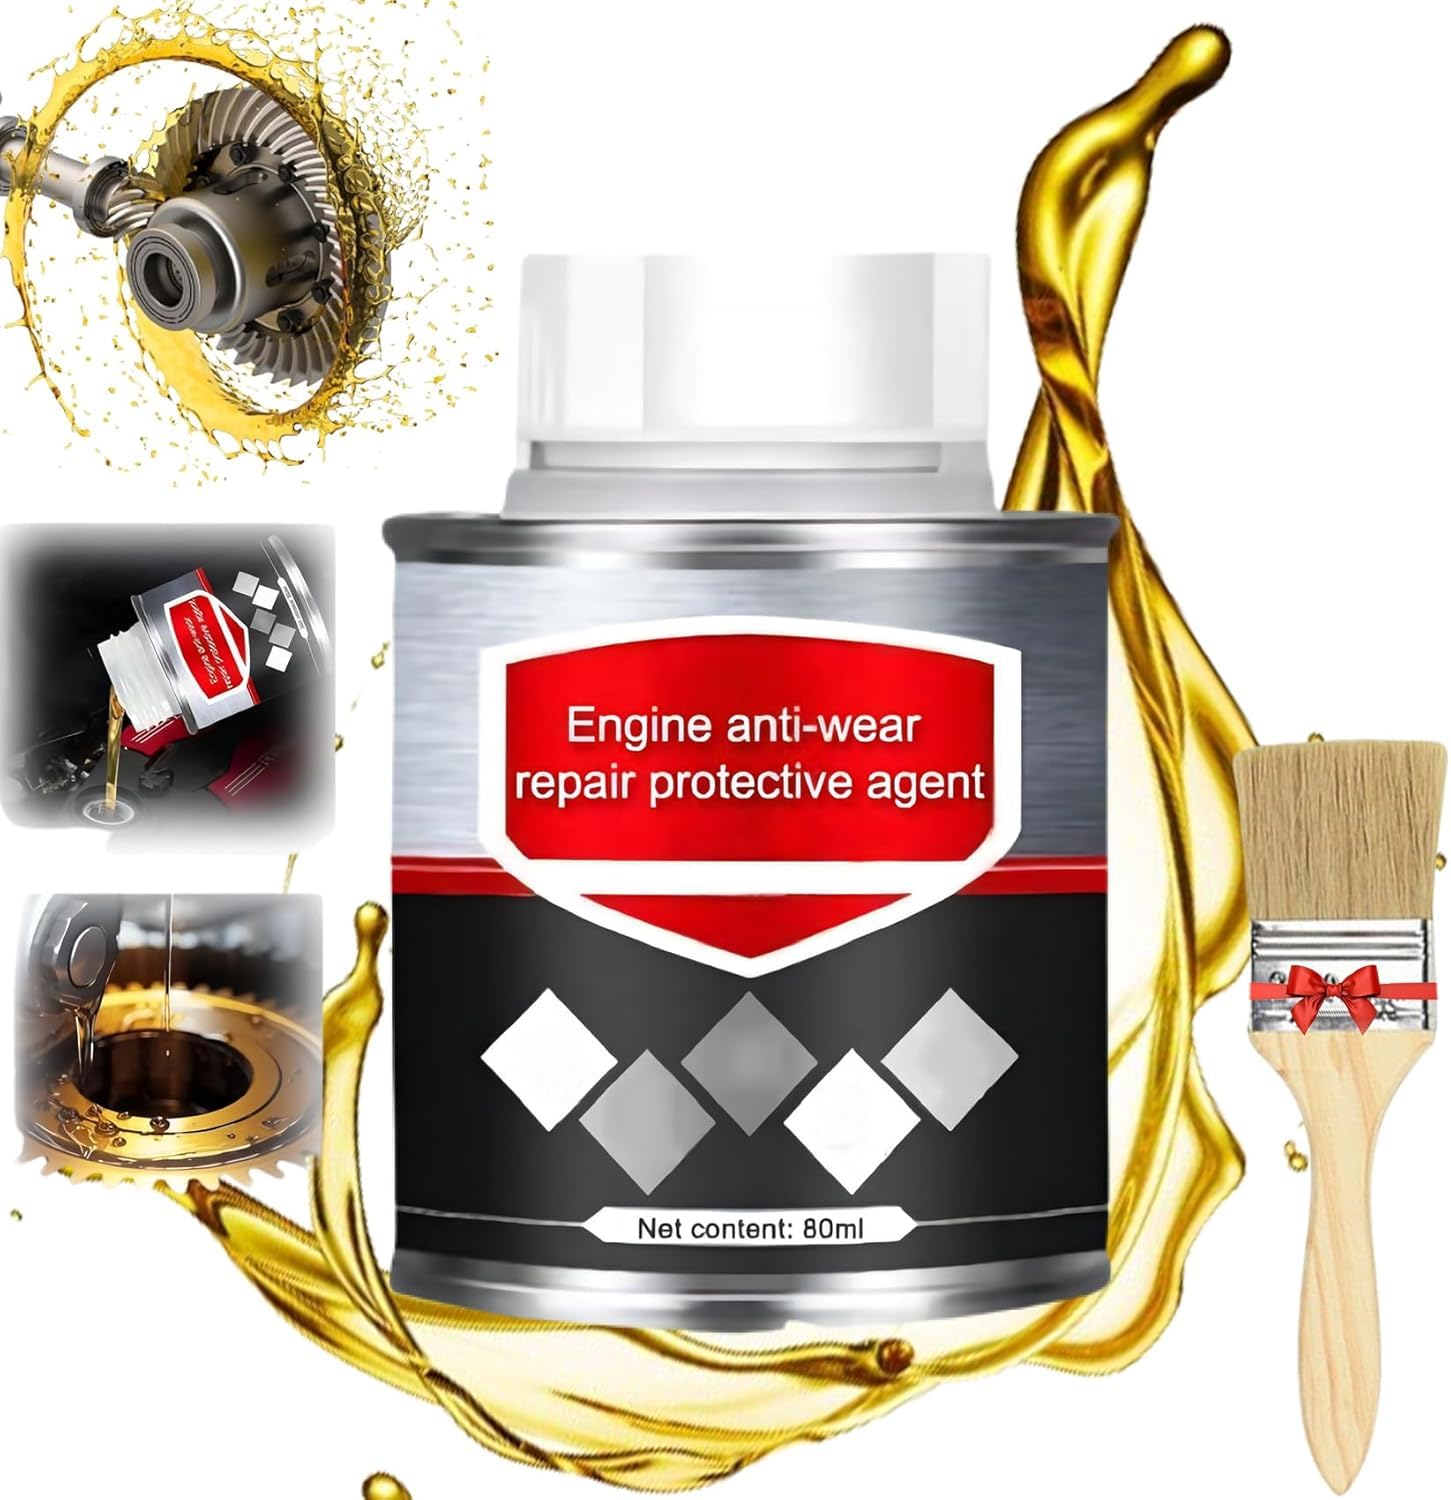 Engine Anti-wear Repair and Maintenance Conditioner,Highly Effective Engine Anti-Wear Protectant,Engine Restorer & Lubricant,Maximum Performance,for Repair,Protection (1pcs) von Aicoyiu